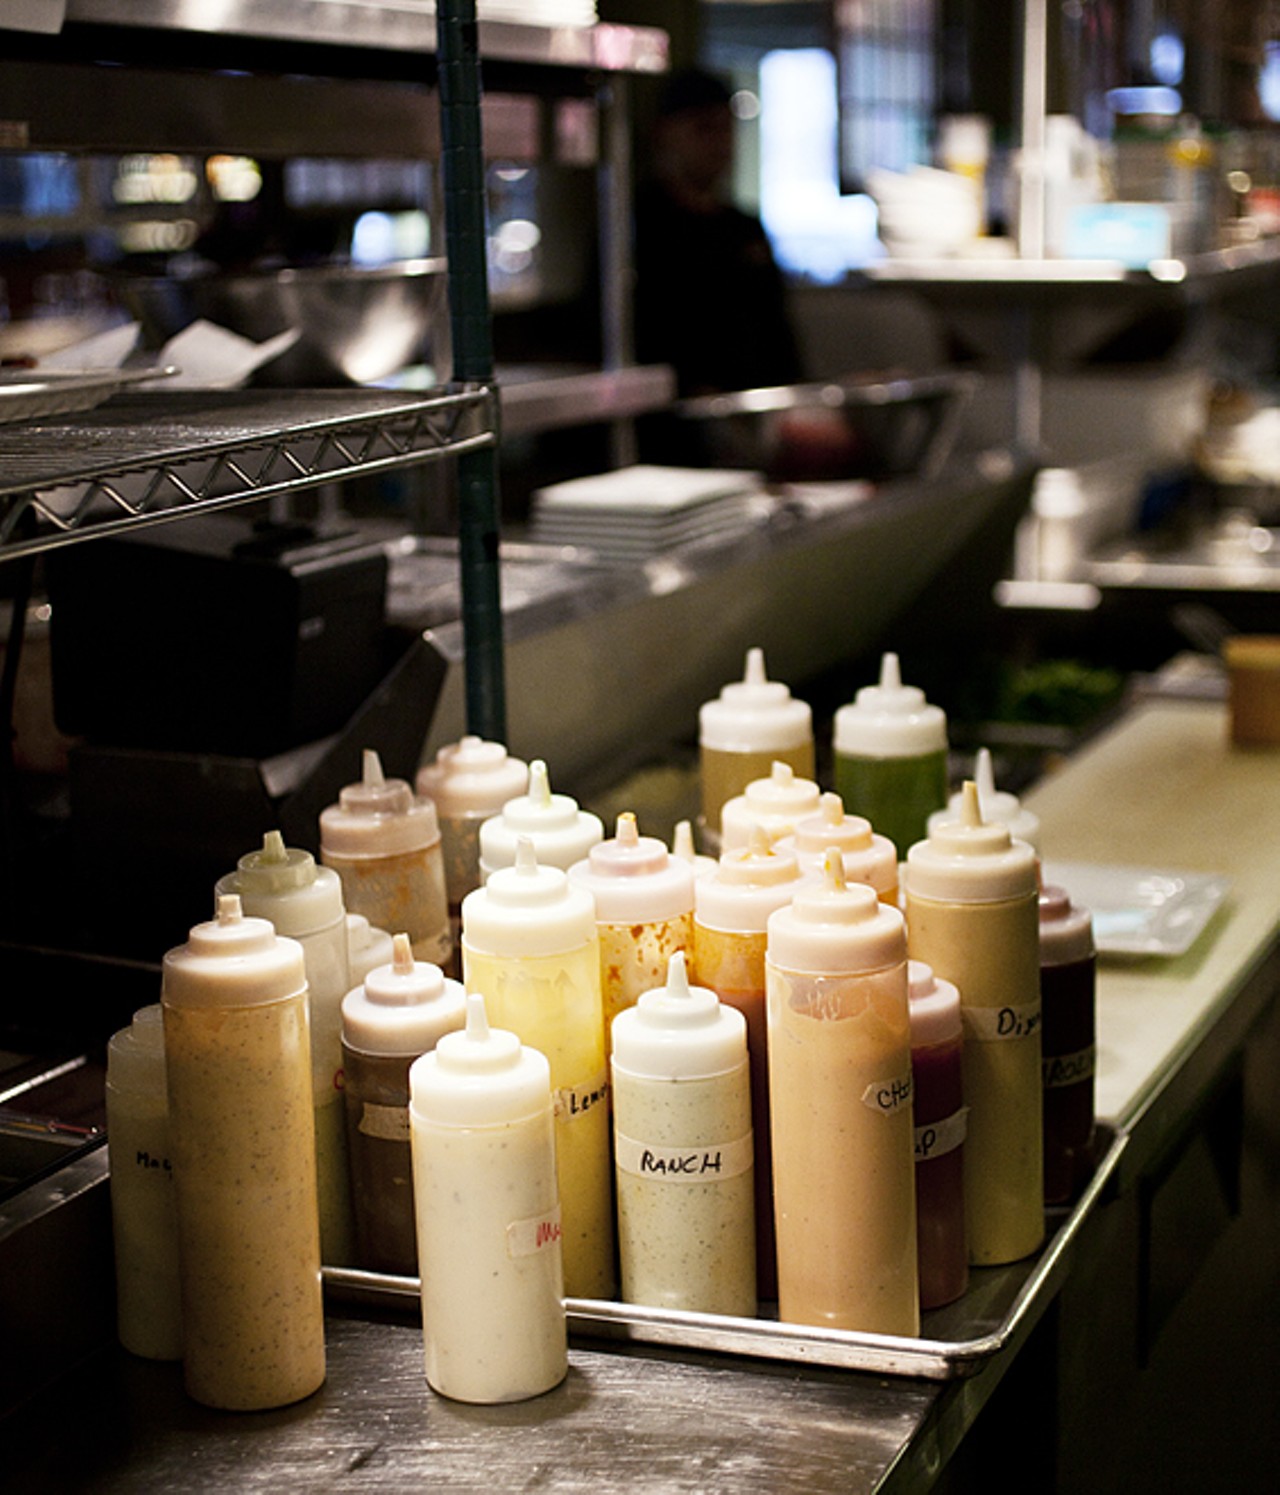 All sauces are made in-house.